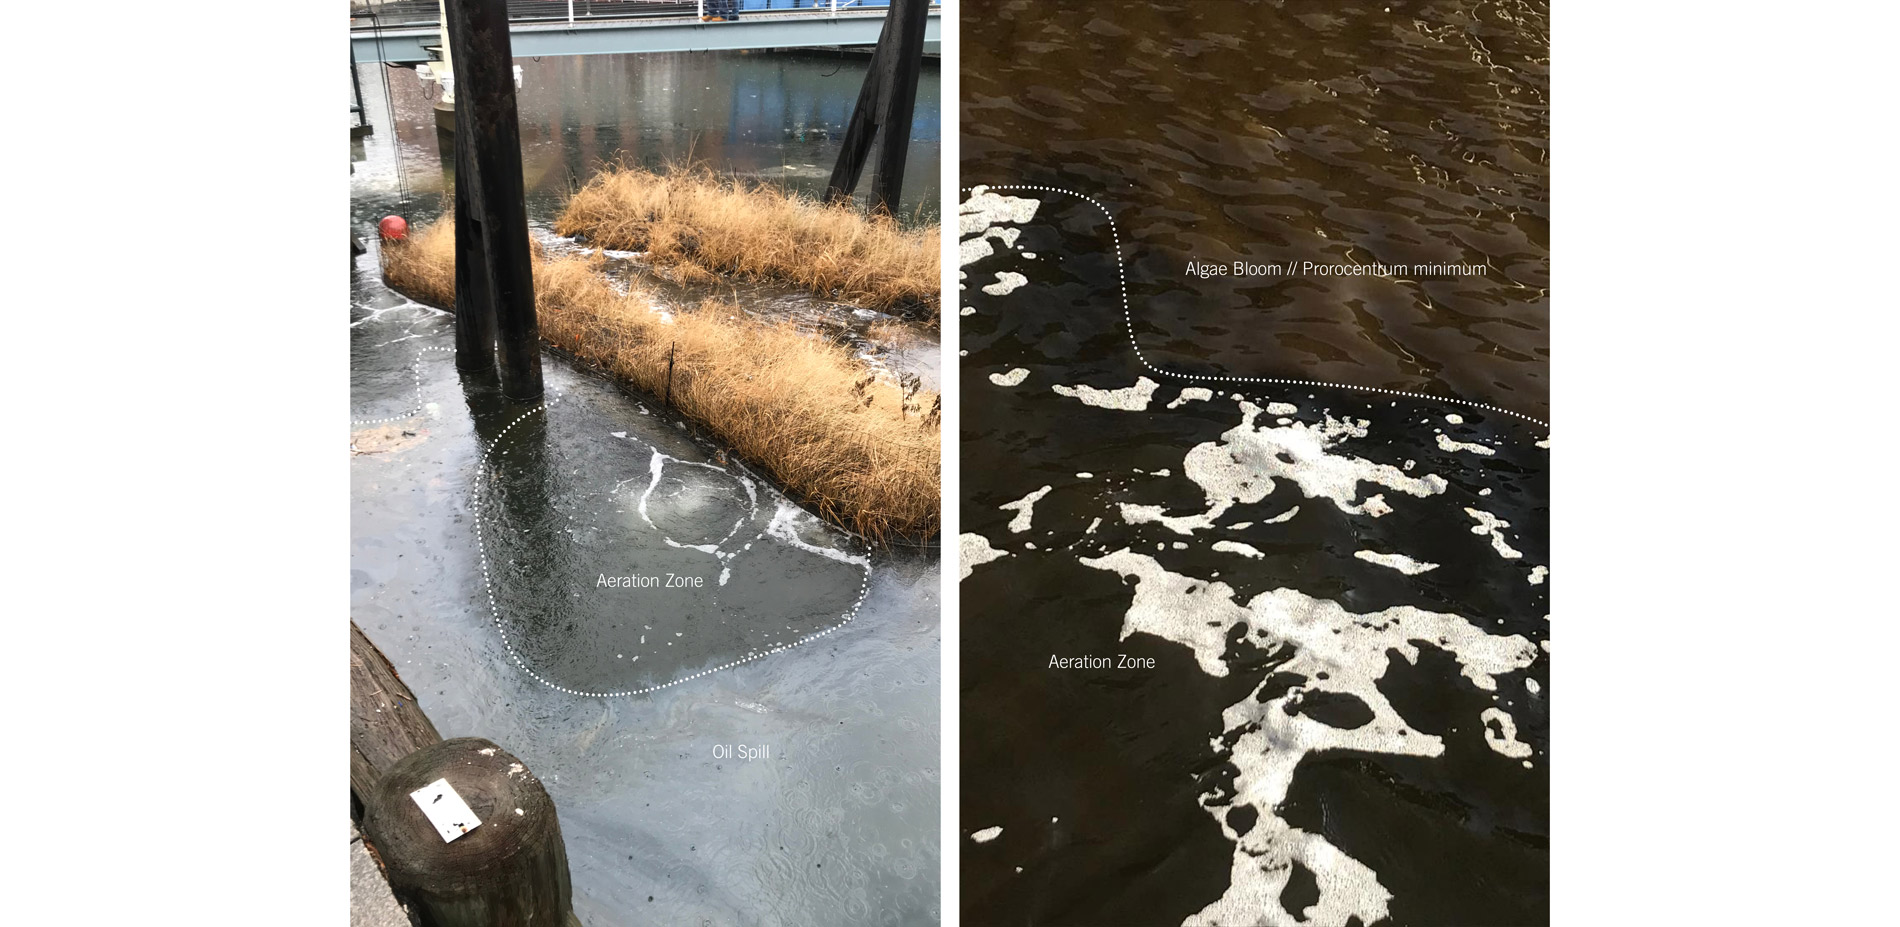 Quickly after implementation the scientist at the National Aquarium found a diversity of biofilms attracted to the floating wetland. Their presence is…